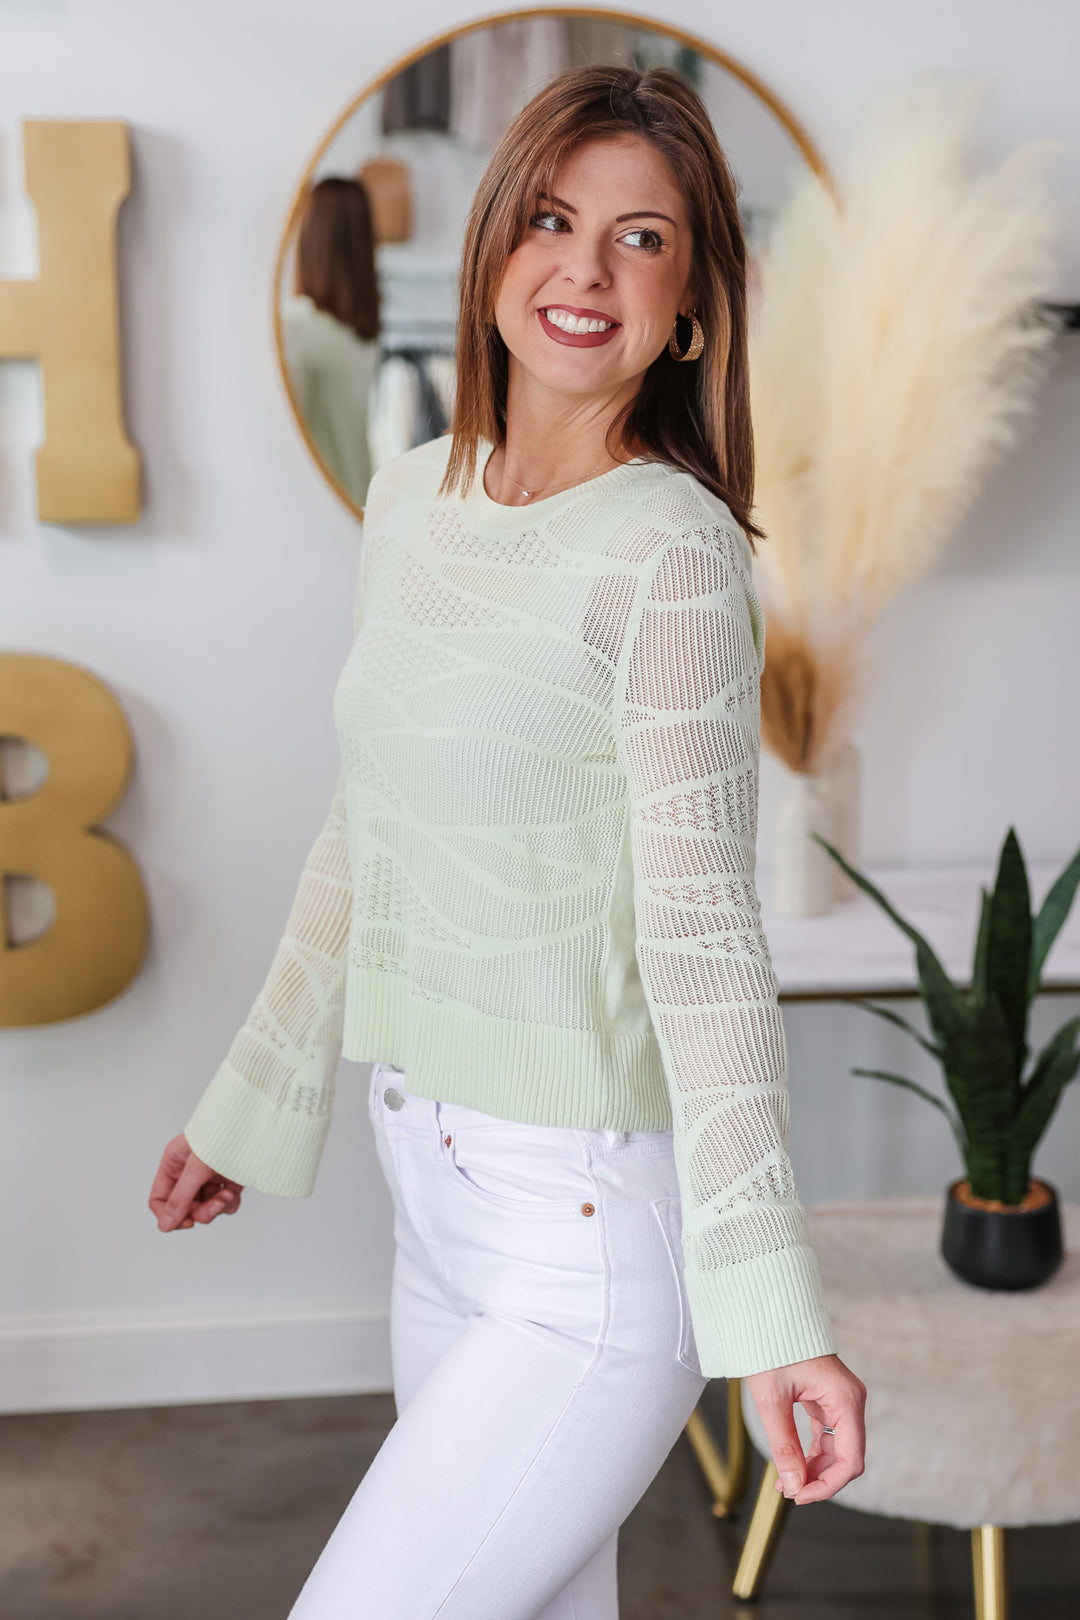 A brunette woman standing in a shop wearing a mint green knit top with white jeans.